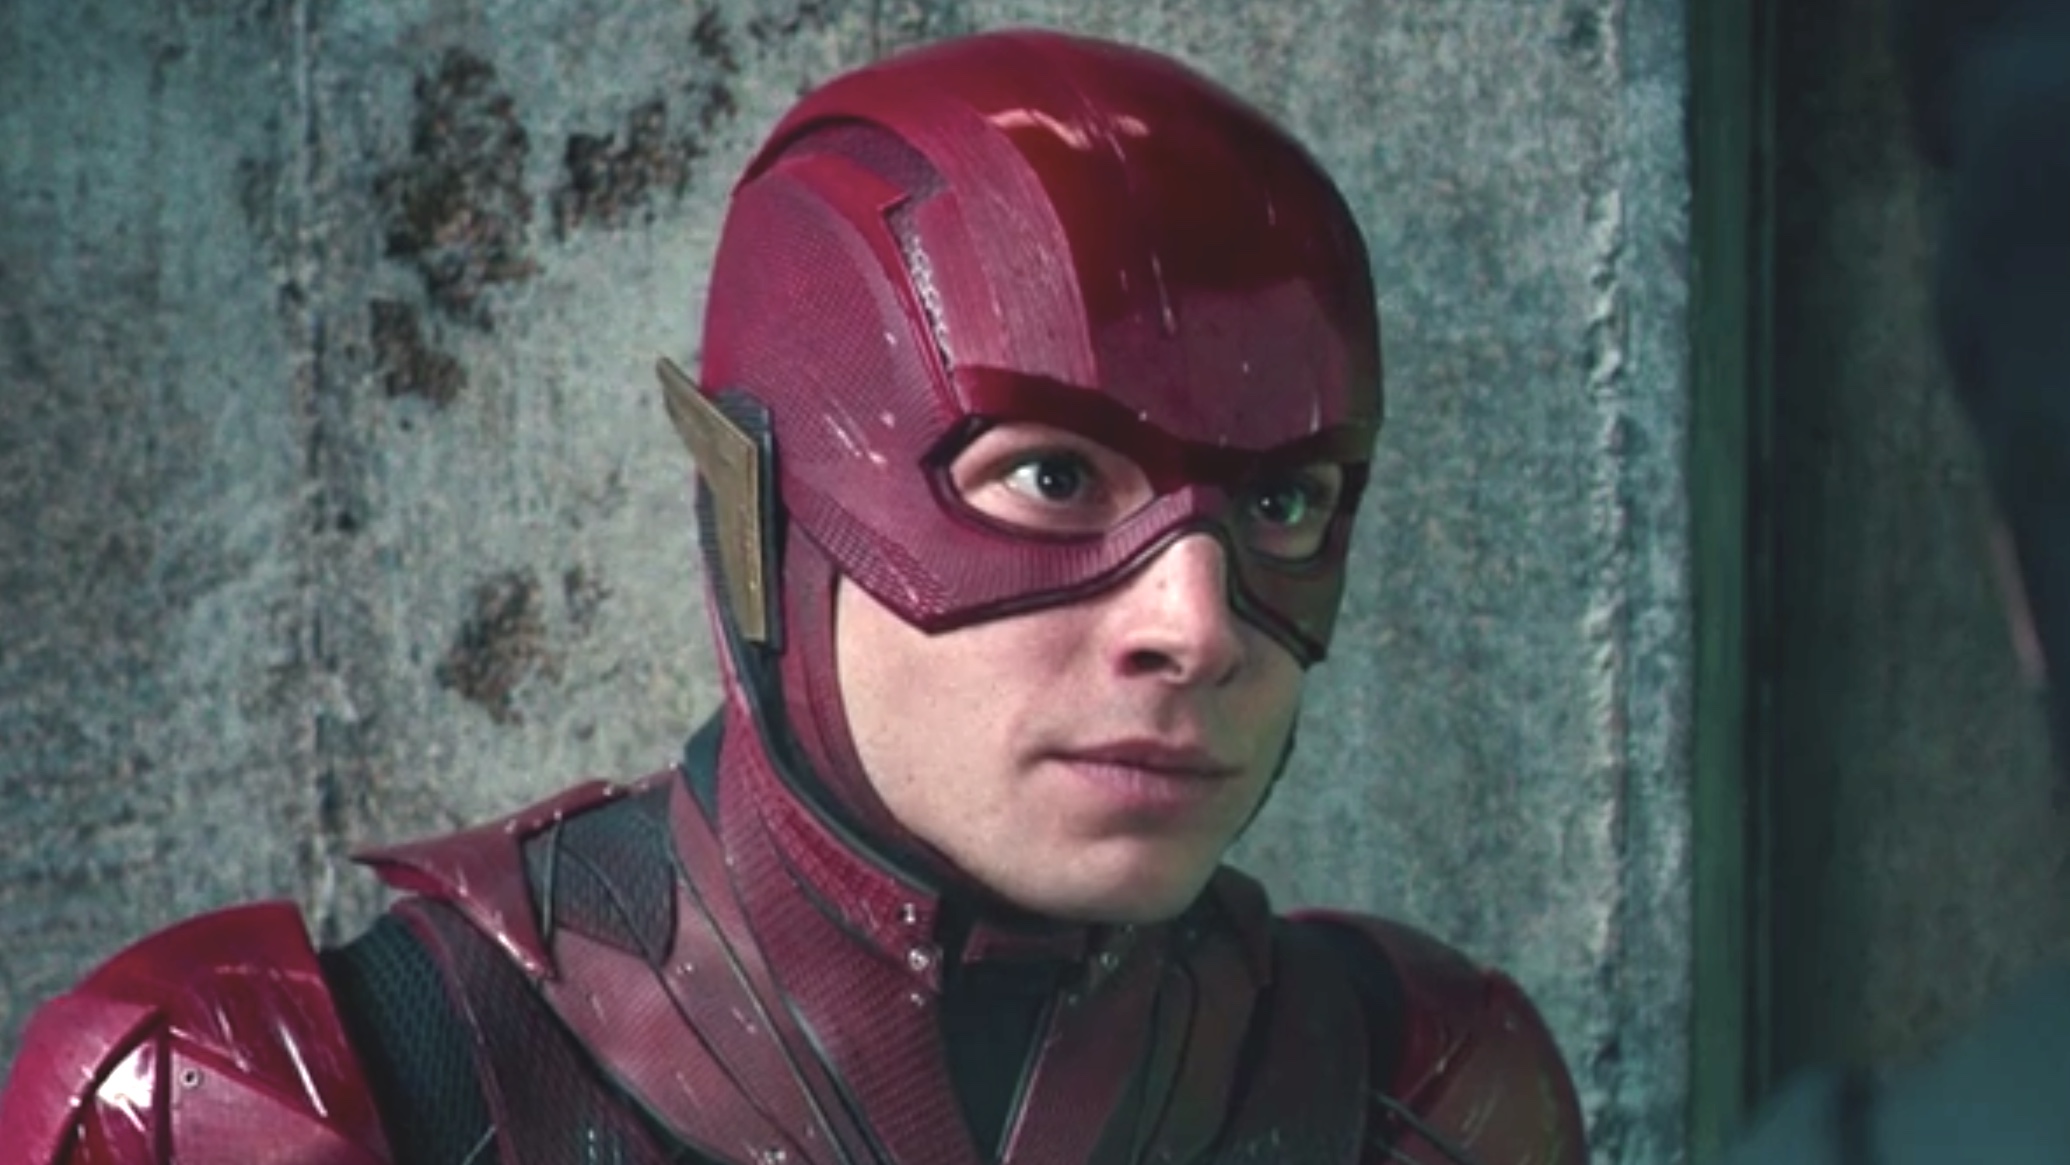 The Flash review - DC movie doesn't live up to the hype